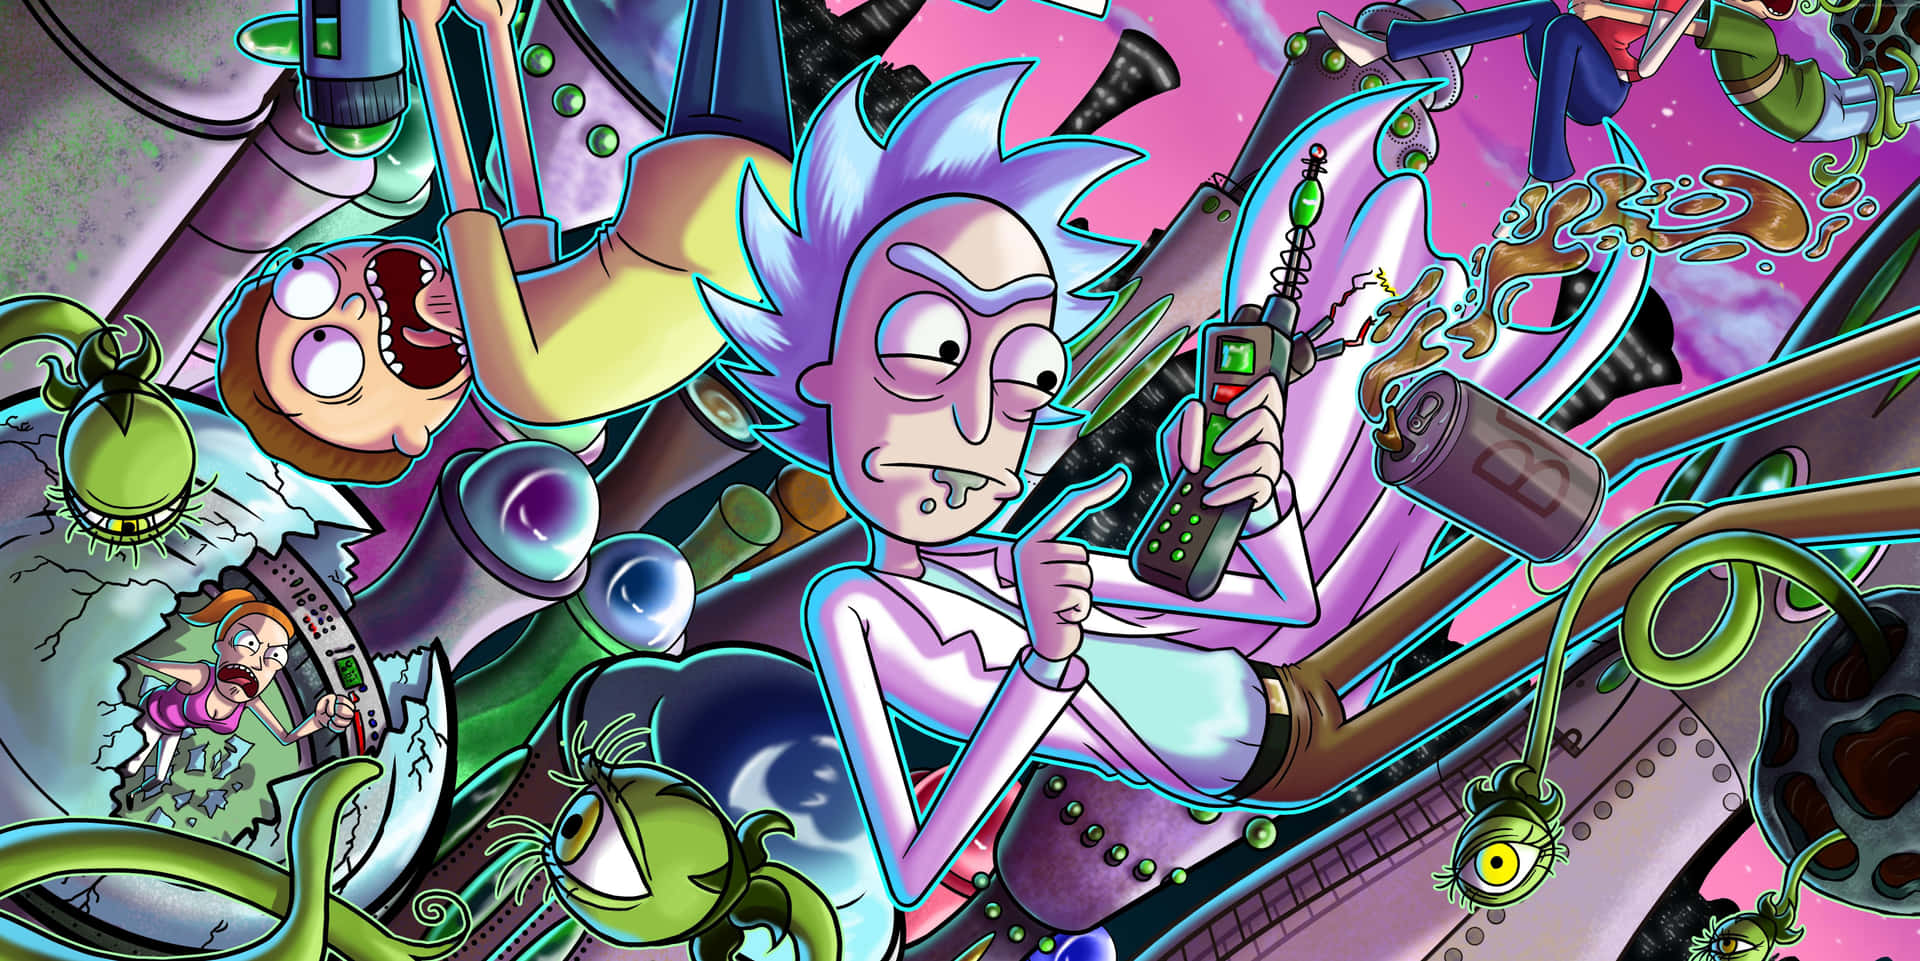 Morty Smith living life to the fullest. Wallpaper